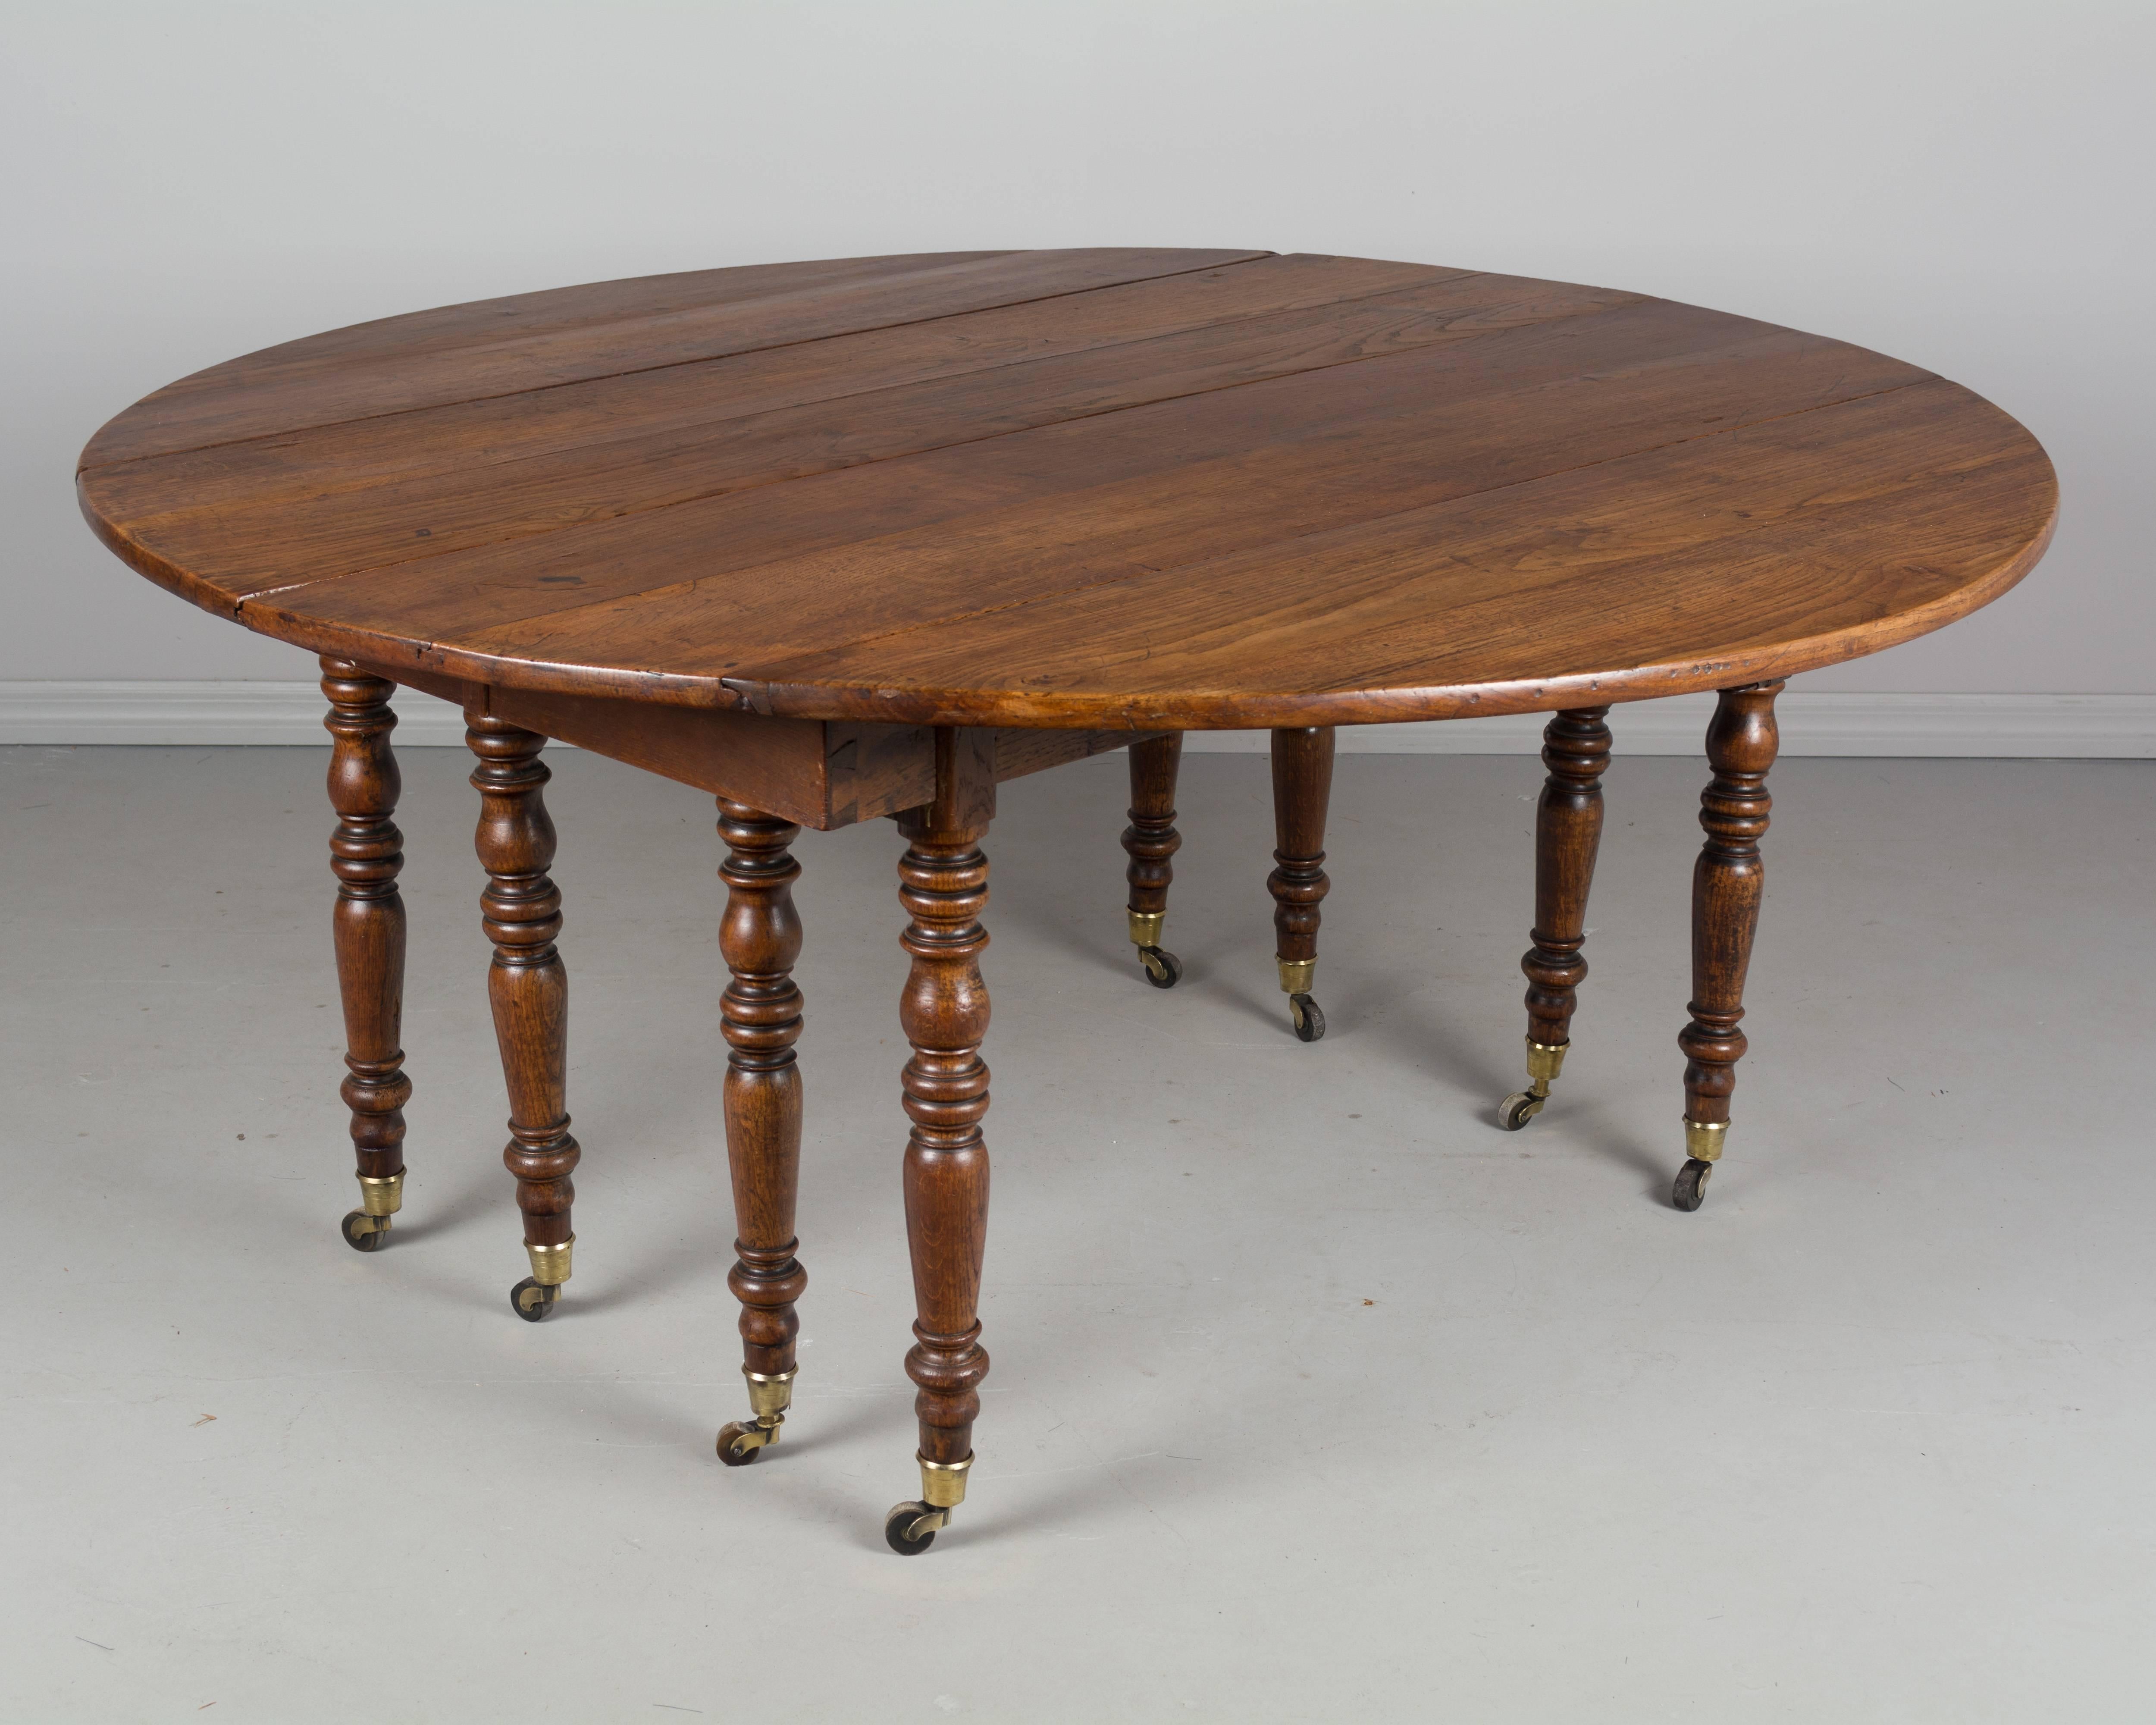 Chestnut 19th c. Louis Philippe Dining Table with extensions